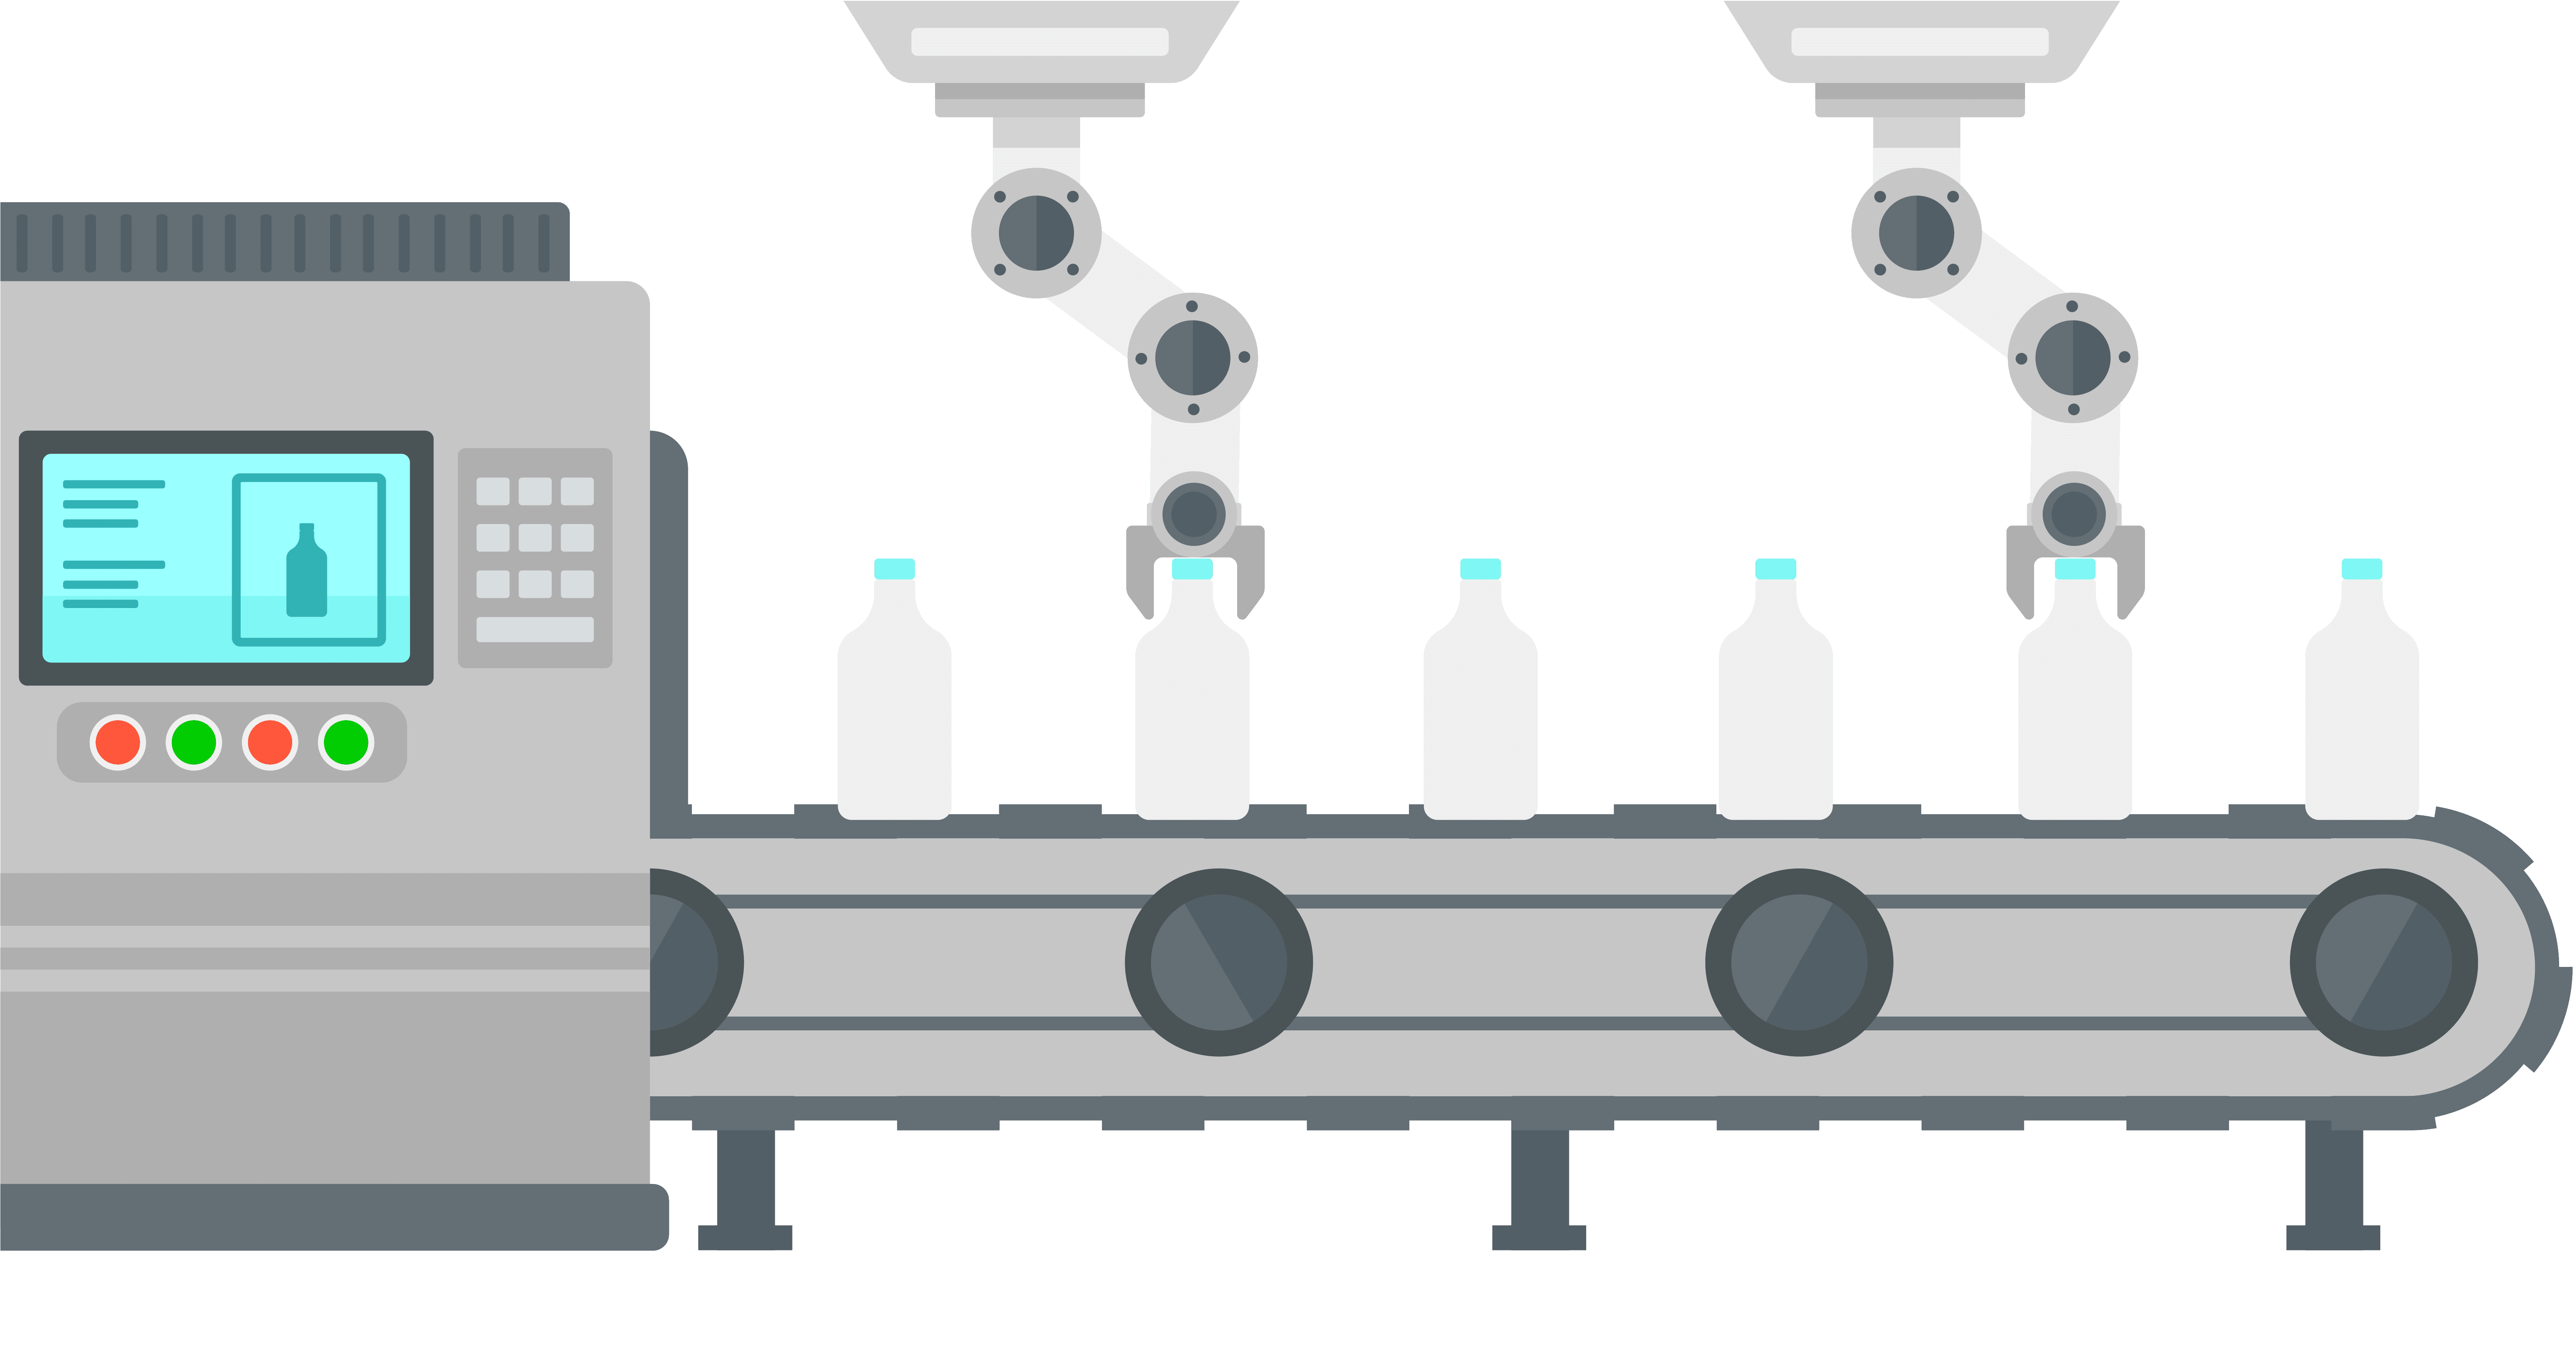 Bottle specifications and measurement